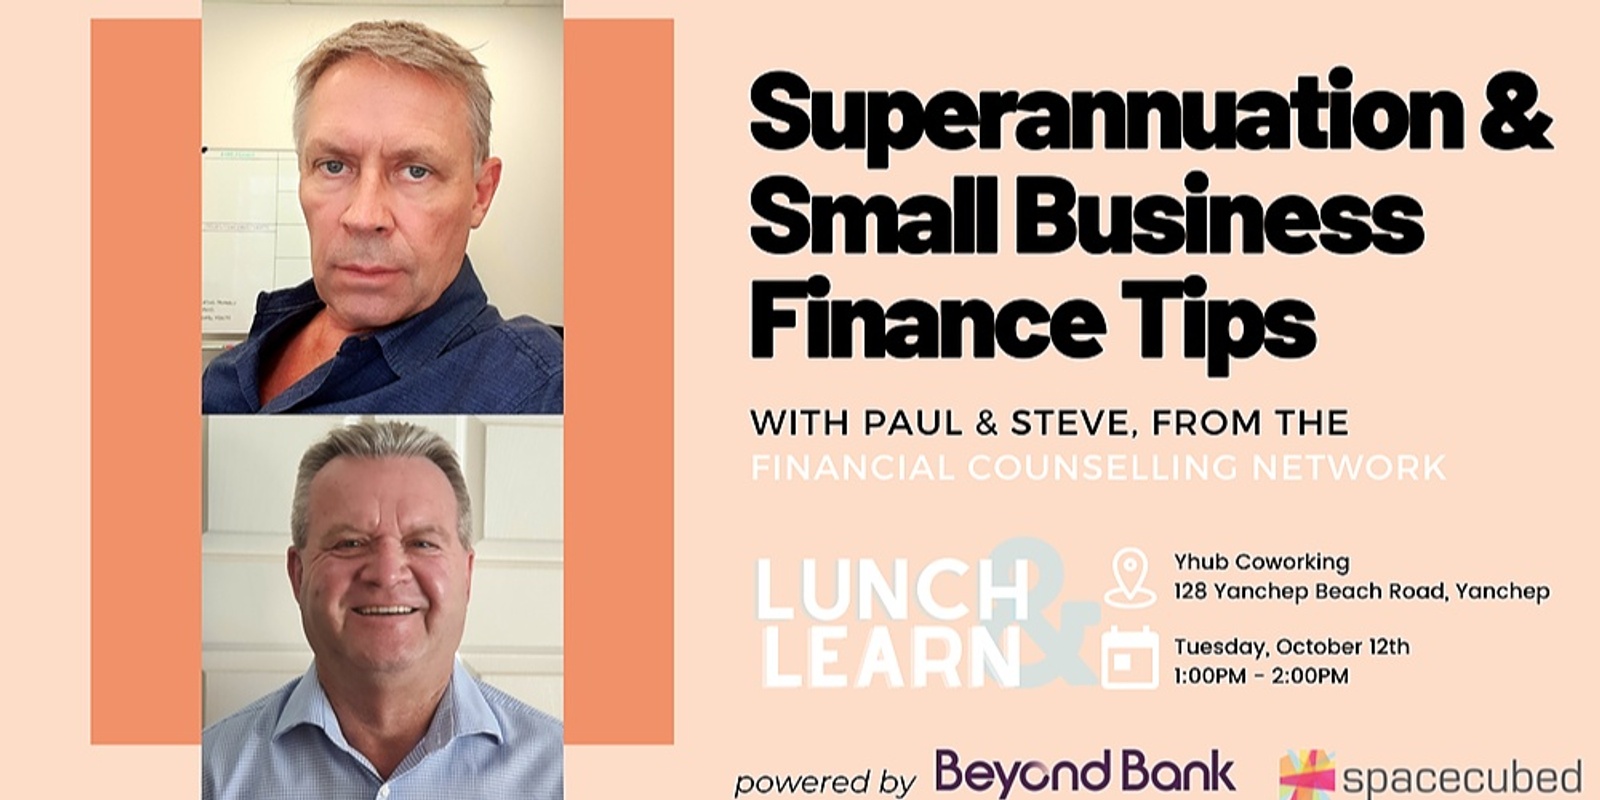 Yhub presents Lunch & Learn featuring The Financial Counselling Network: Superannuation and Small Business Finance Tips